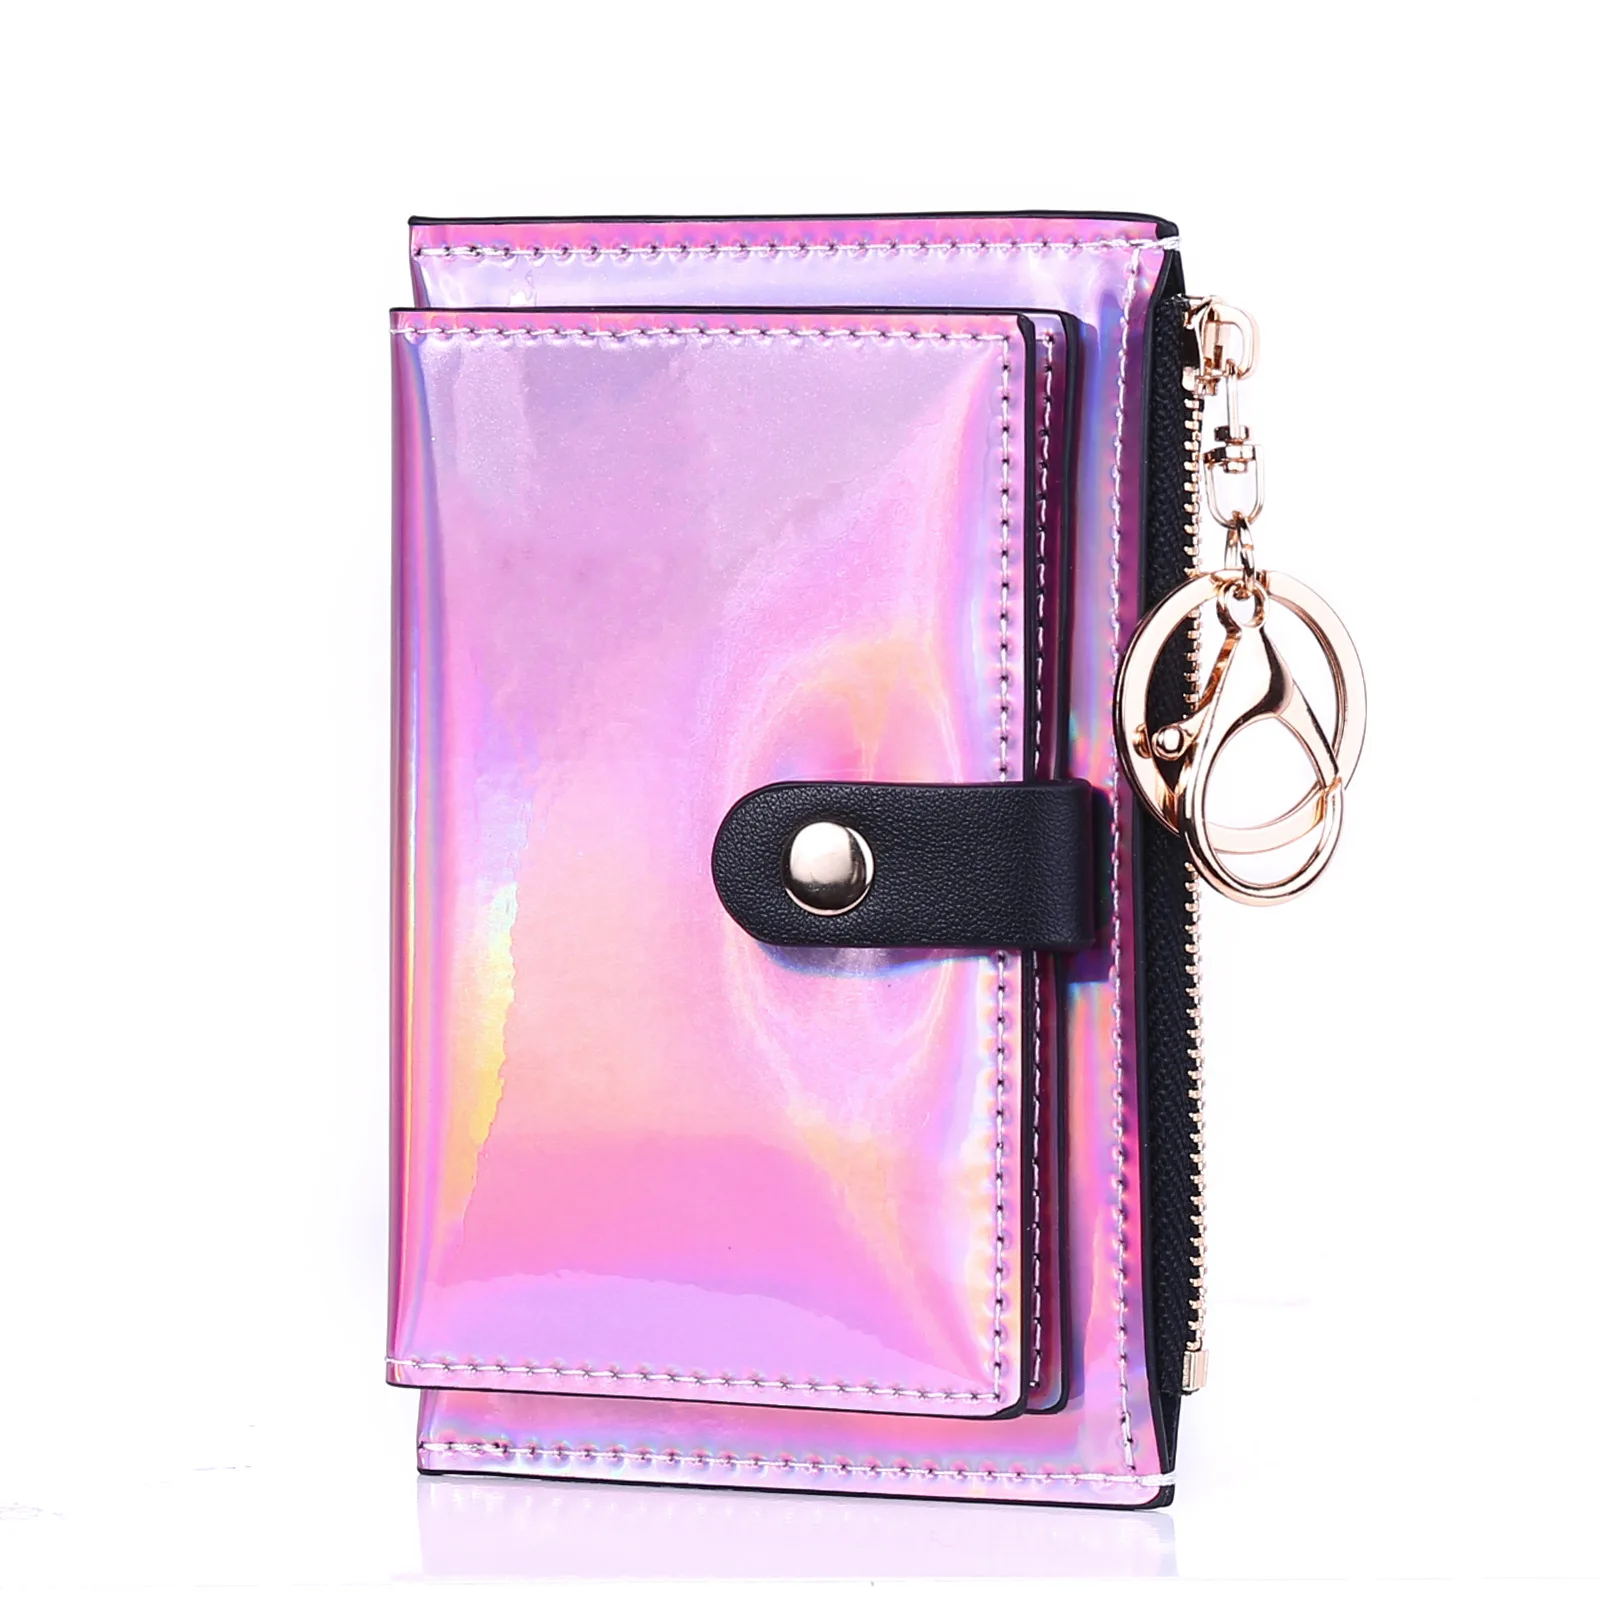 Multislot leather with chain wallet for men for take cards and money